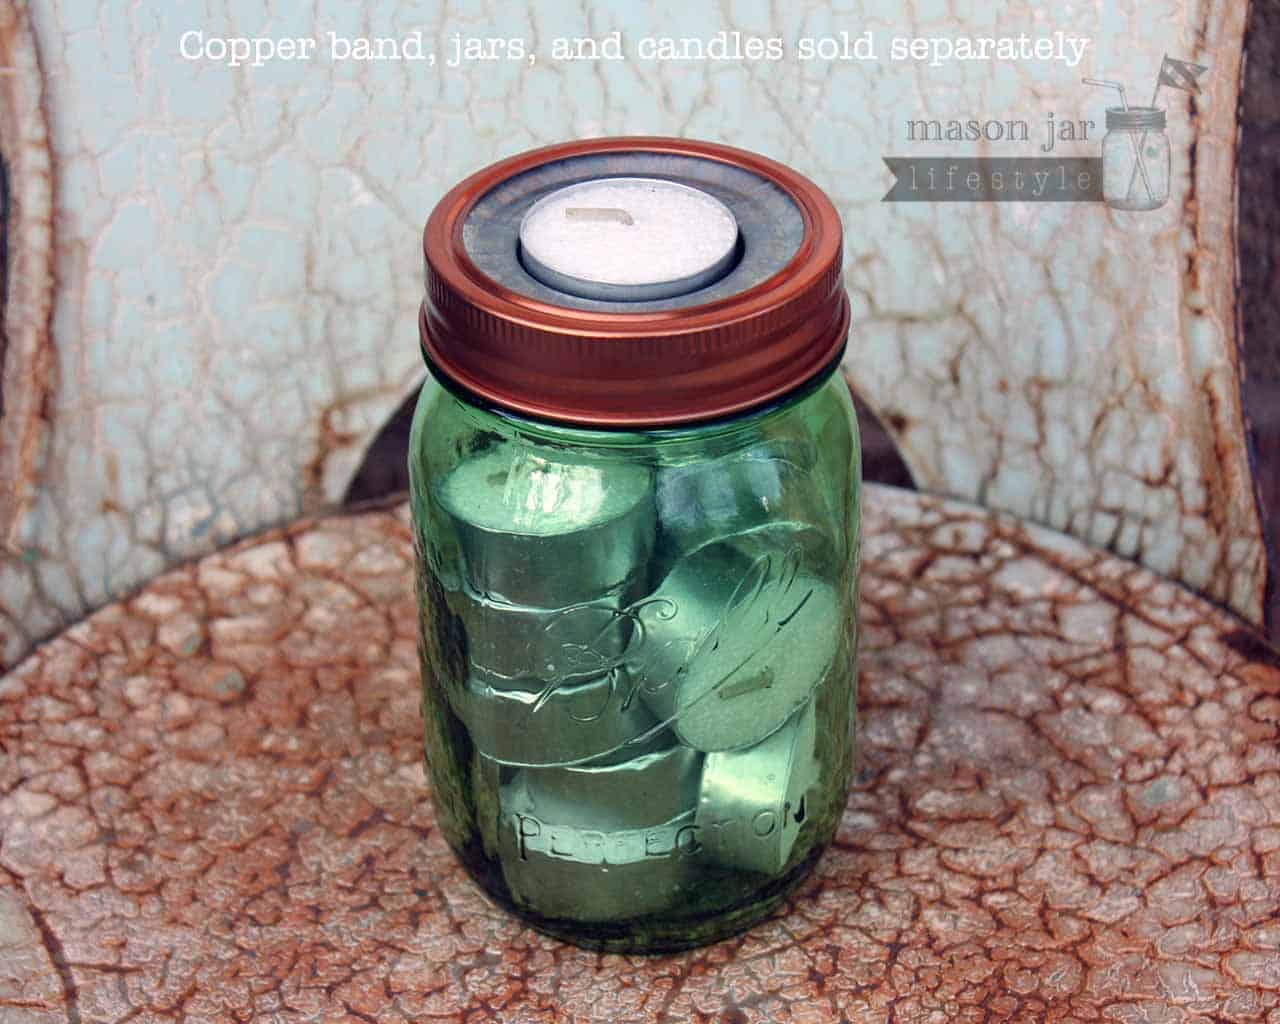 Metal tea light candle holder insert with copper band on green Ball jar with extra tea lights